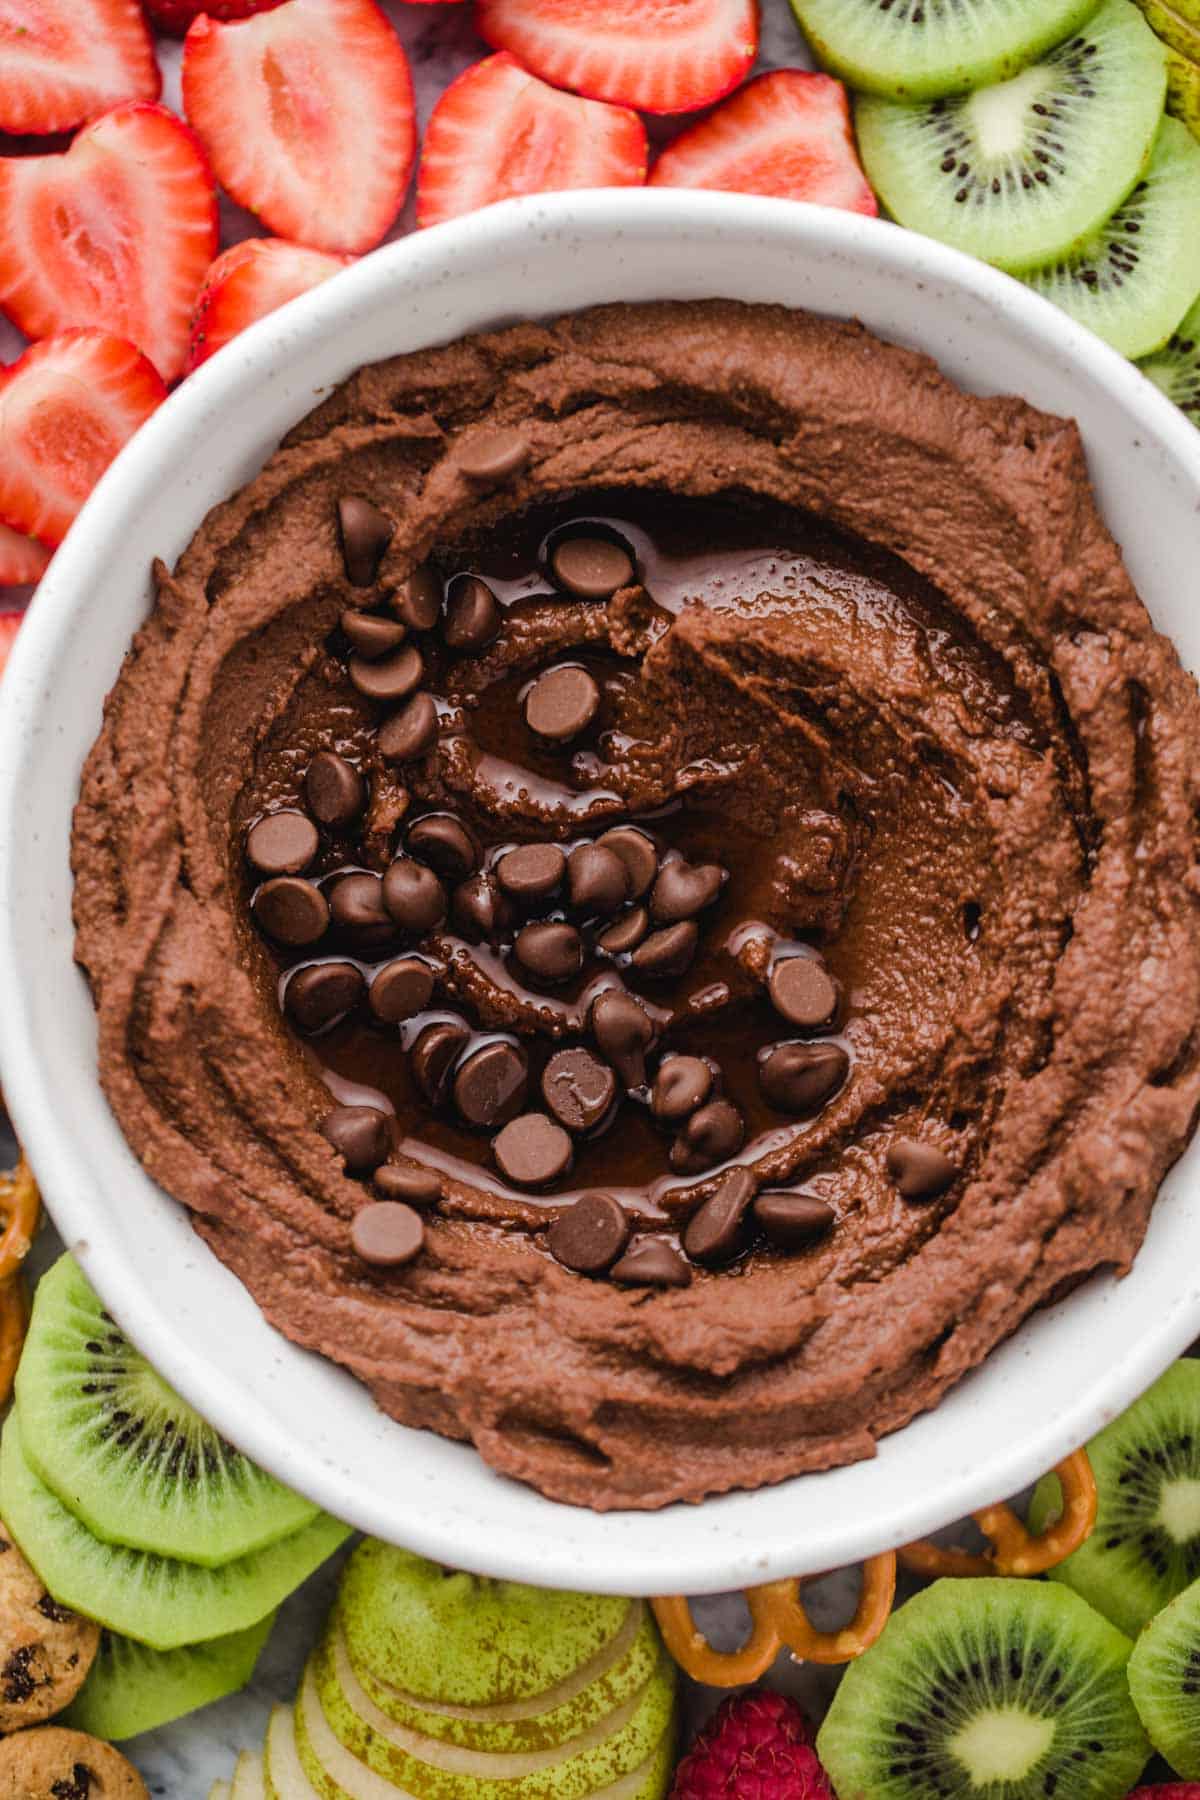 Chocolate hummus in a white bowl, with chopped up fruit on a platter